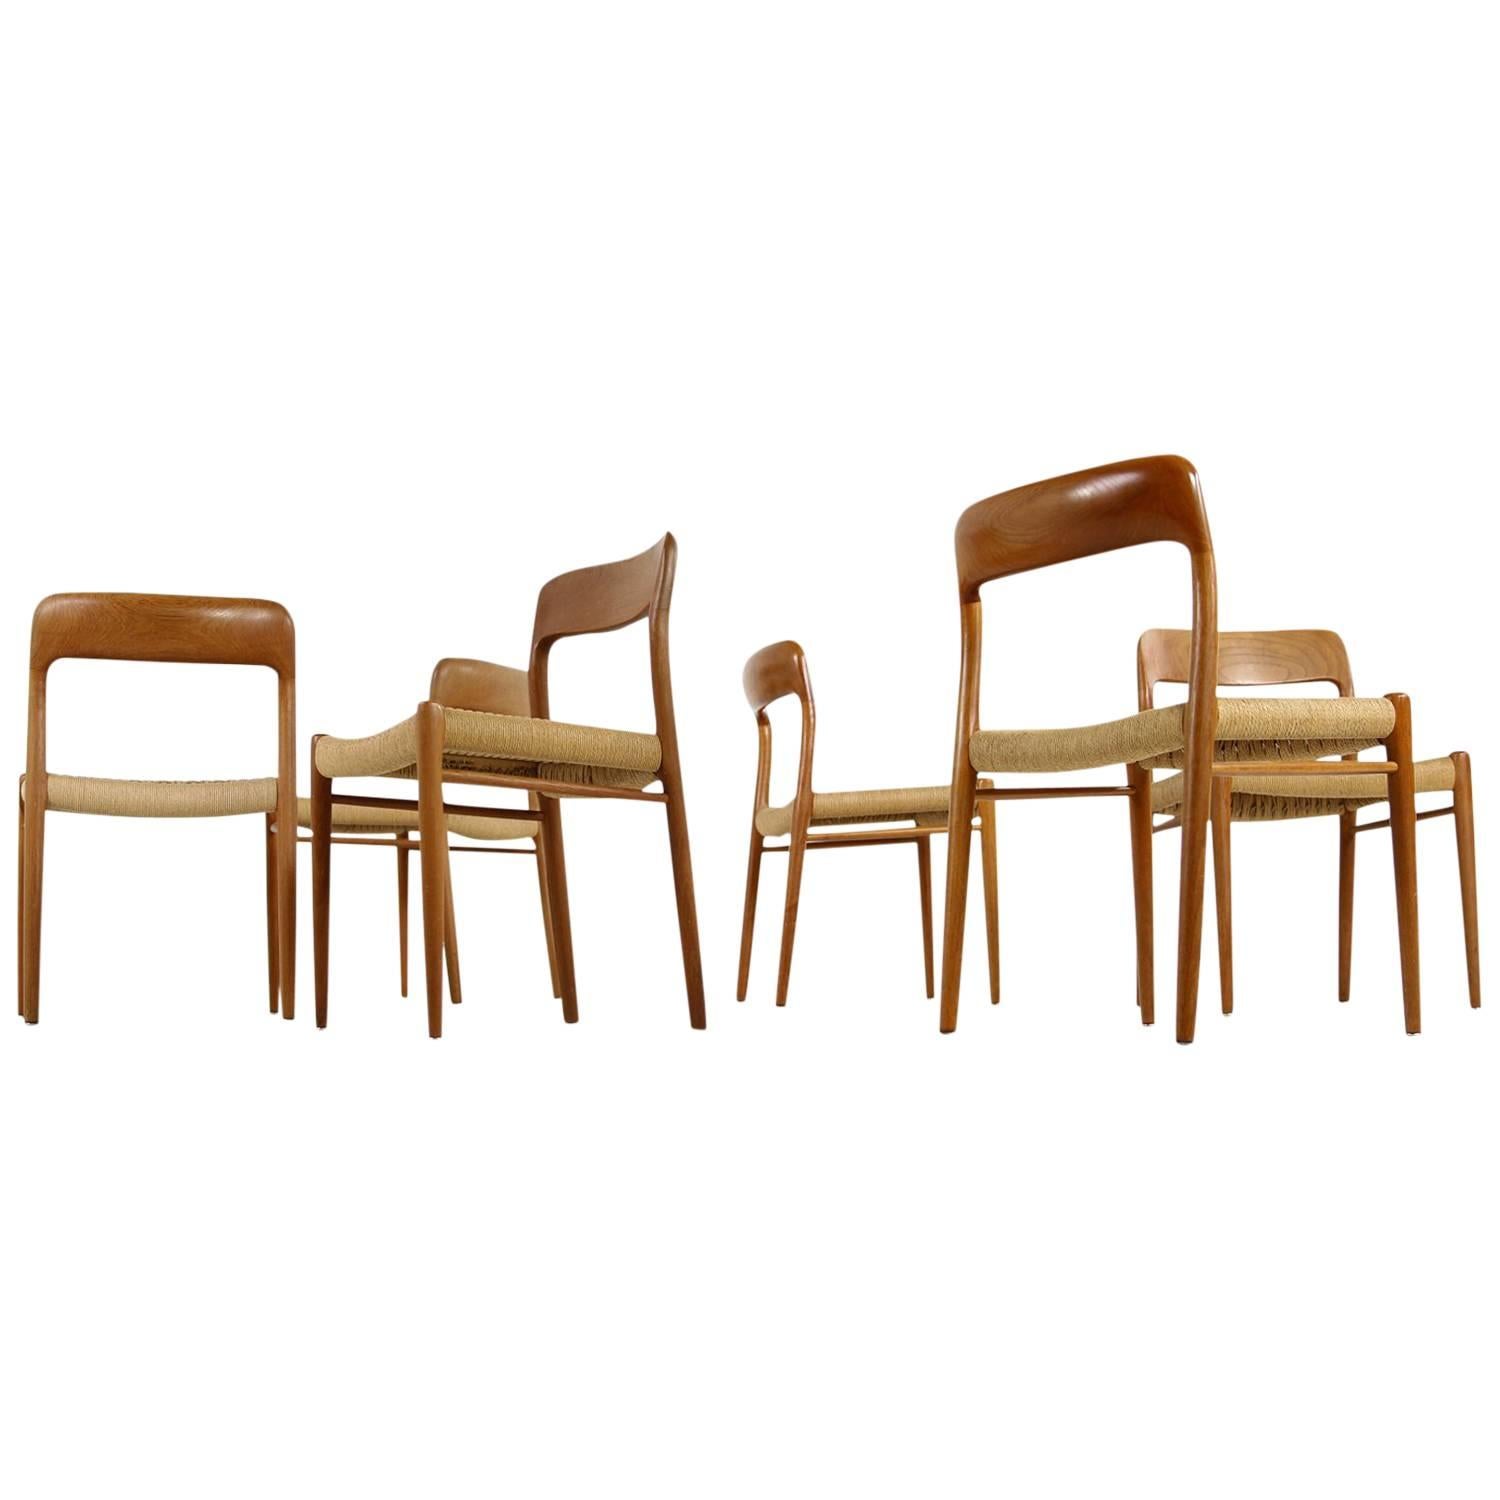 Six 1960s Danish Teak and Cane Dining Room Chairs by Niels O. Moller Mod. 75